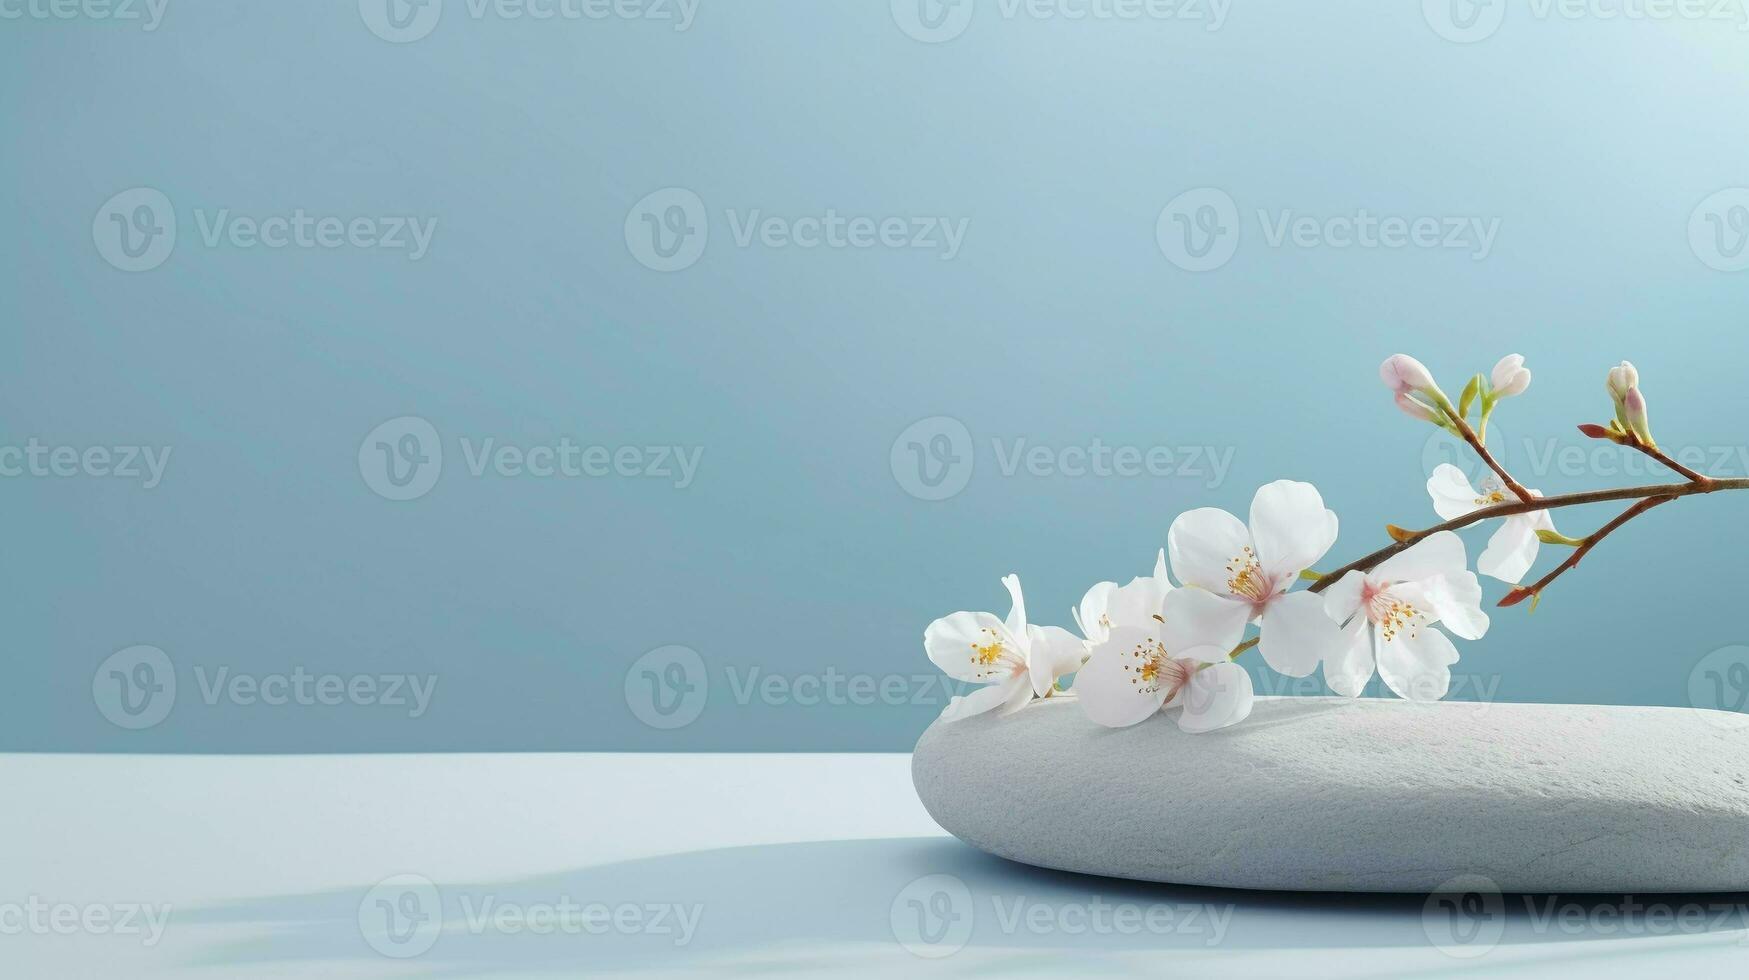 A minimalistic scene of a lying stone with flowers on a light blue background. Showcase for the presentation of natural products and cosmetics. photo